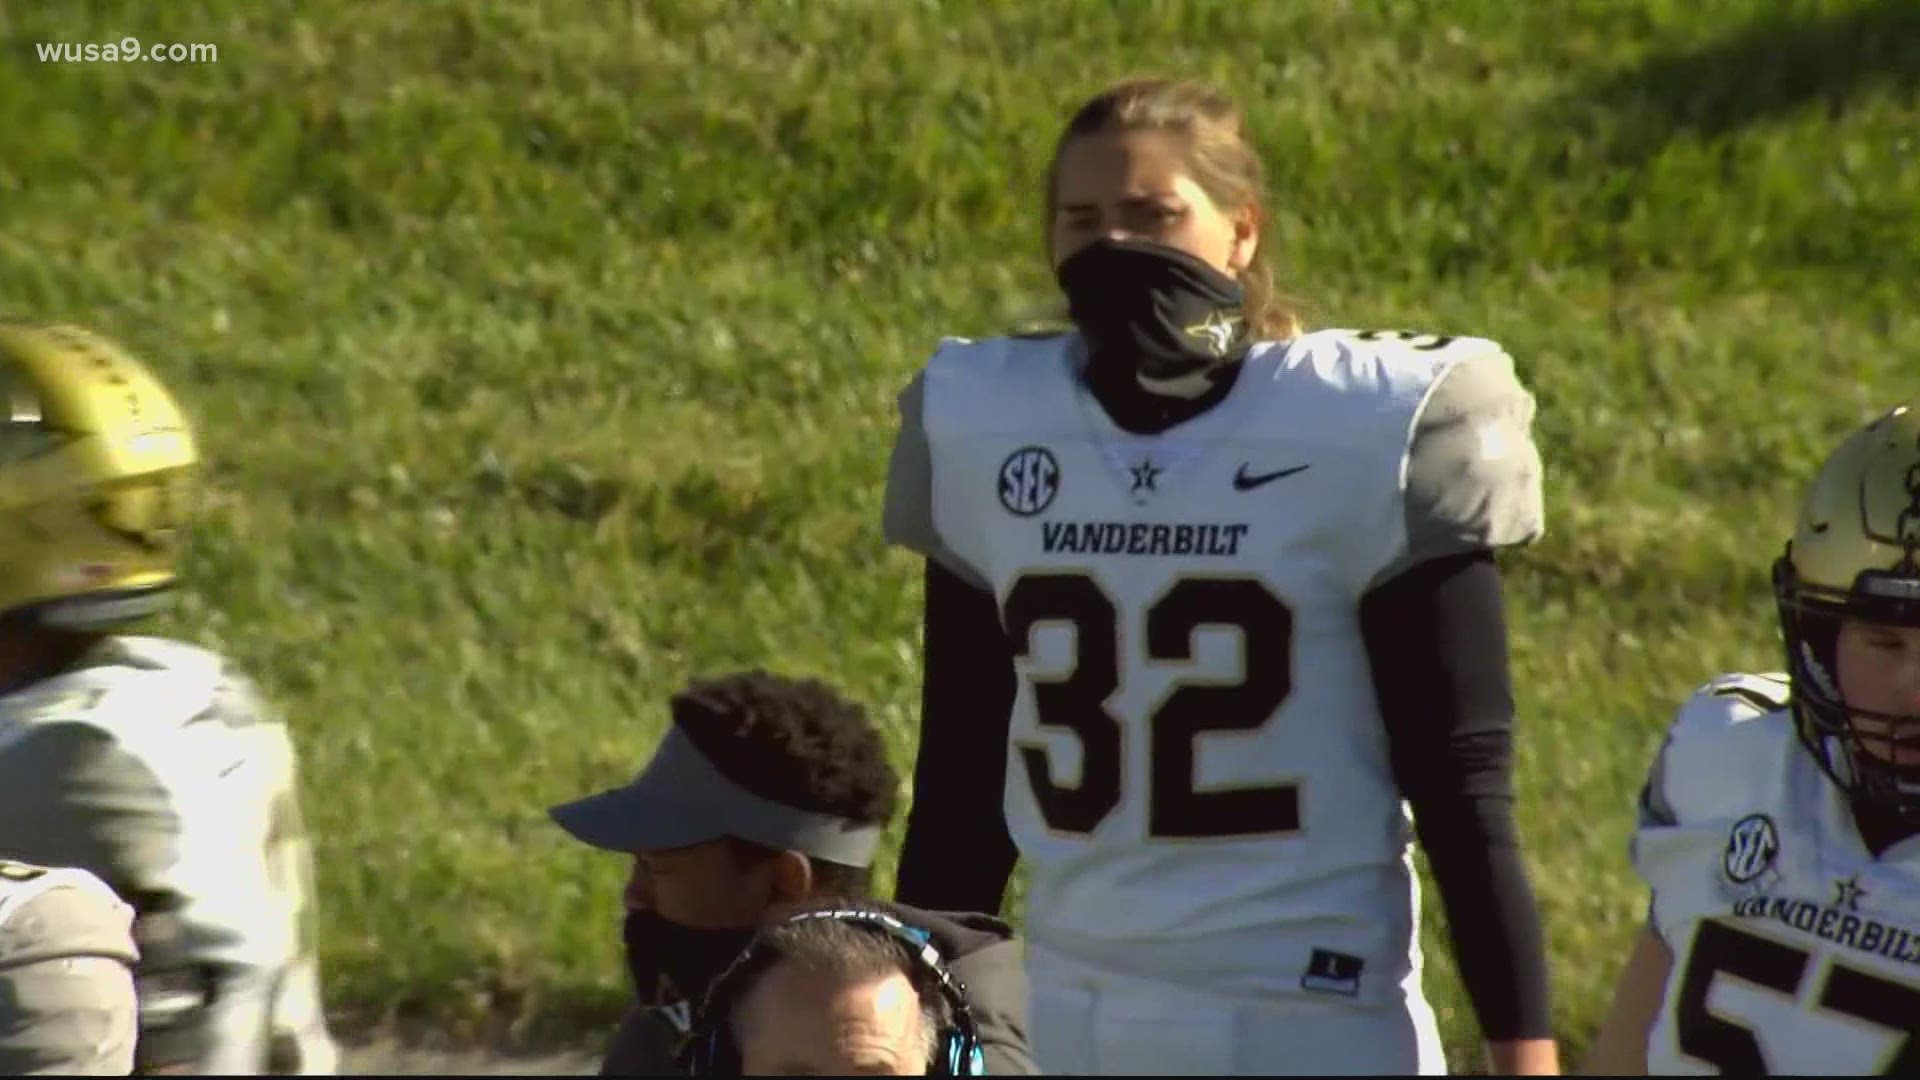 A Vanderbilt women's soccer player makes history, becoming the first woman to play in a Power Five college football game.